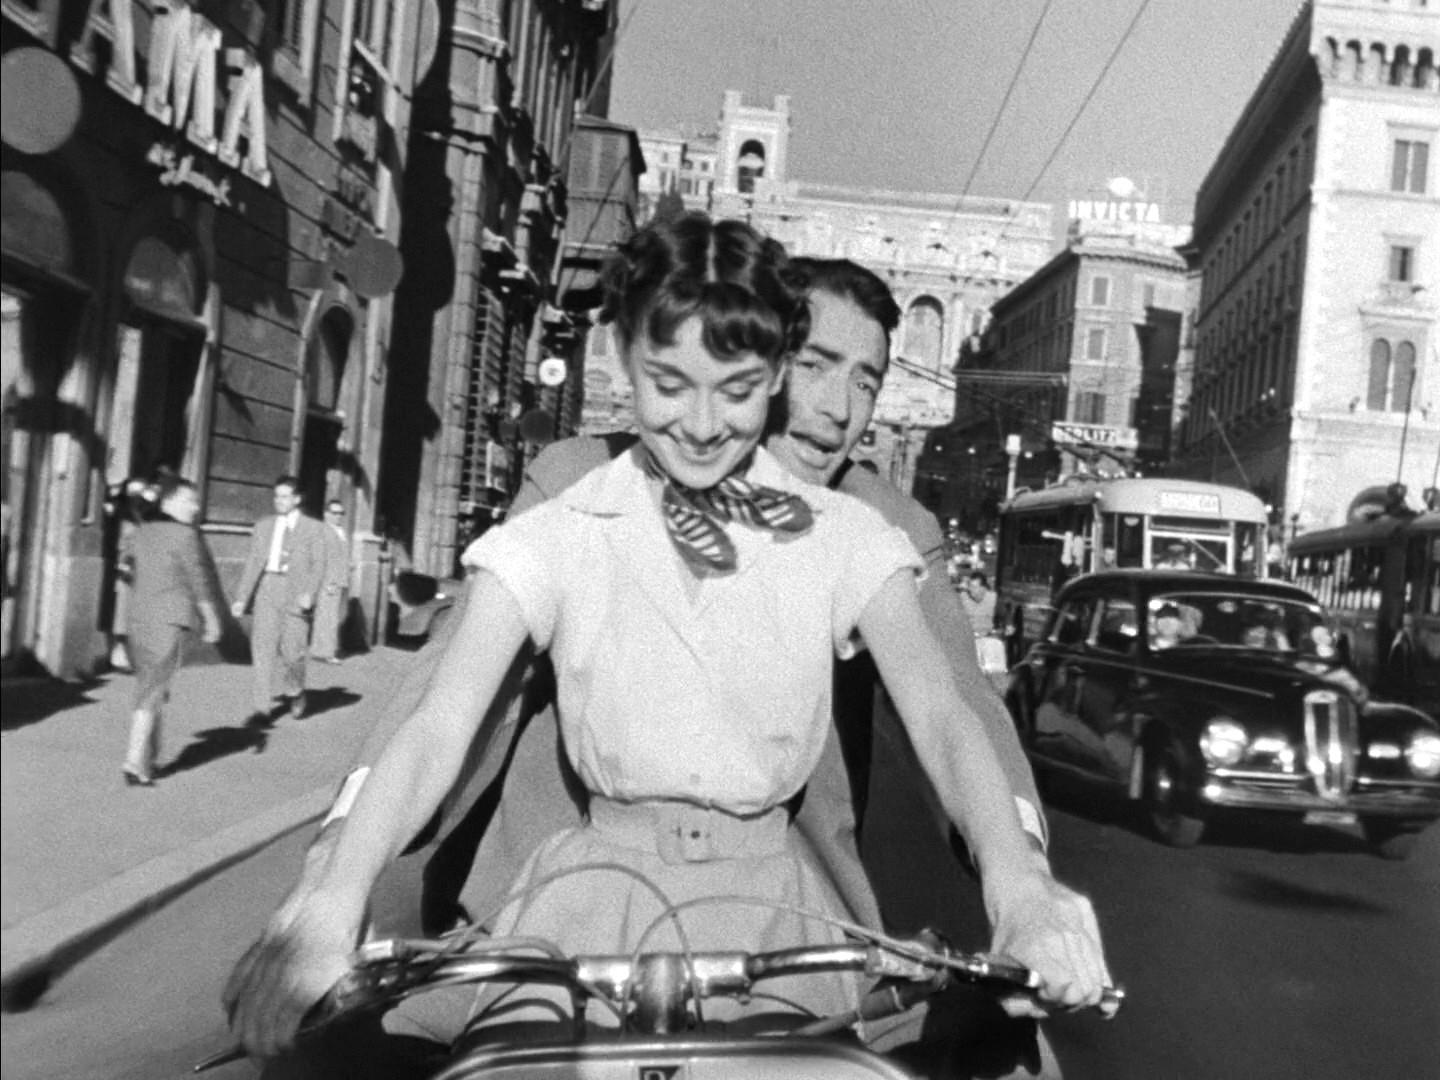 Audrey Hepburn and Gregory Peck from the trailer for the film Roman Holiday. Image from WikiMedia Commons